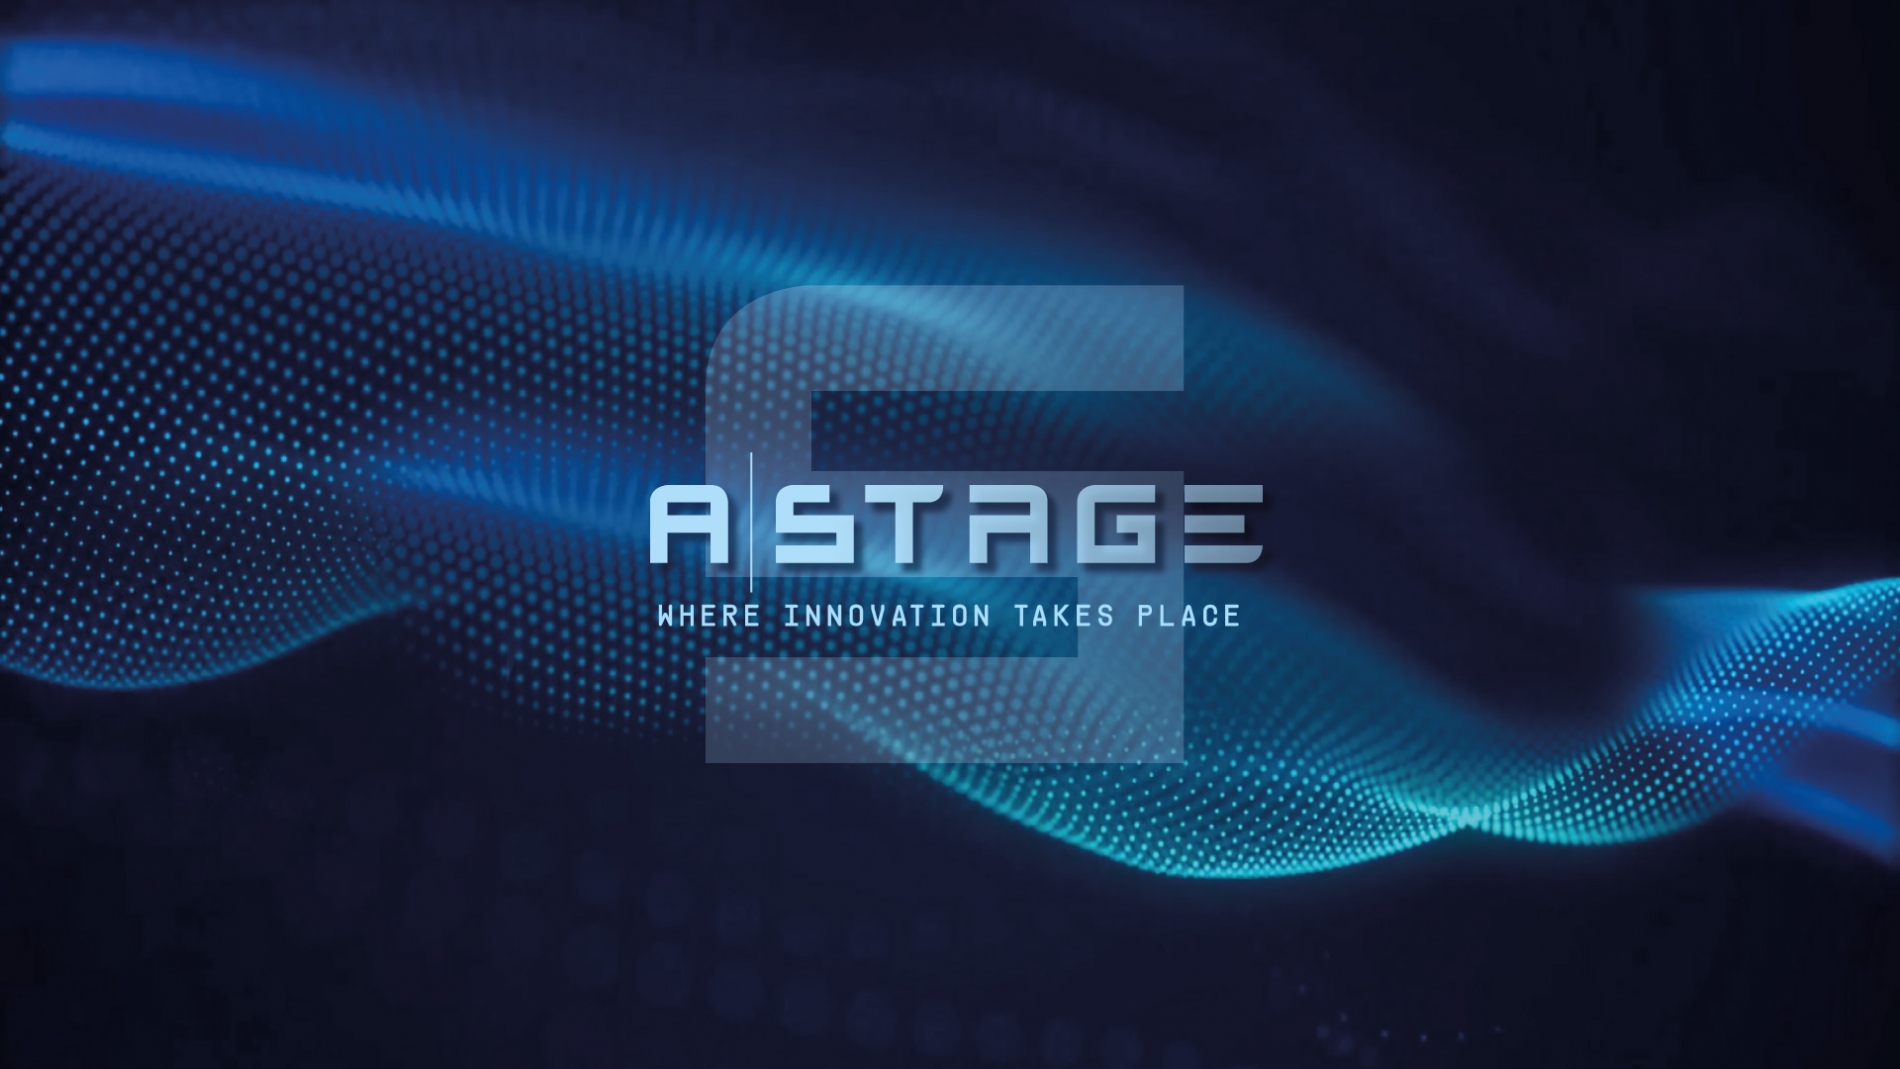 Astage is the new center for marketing in the digital world